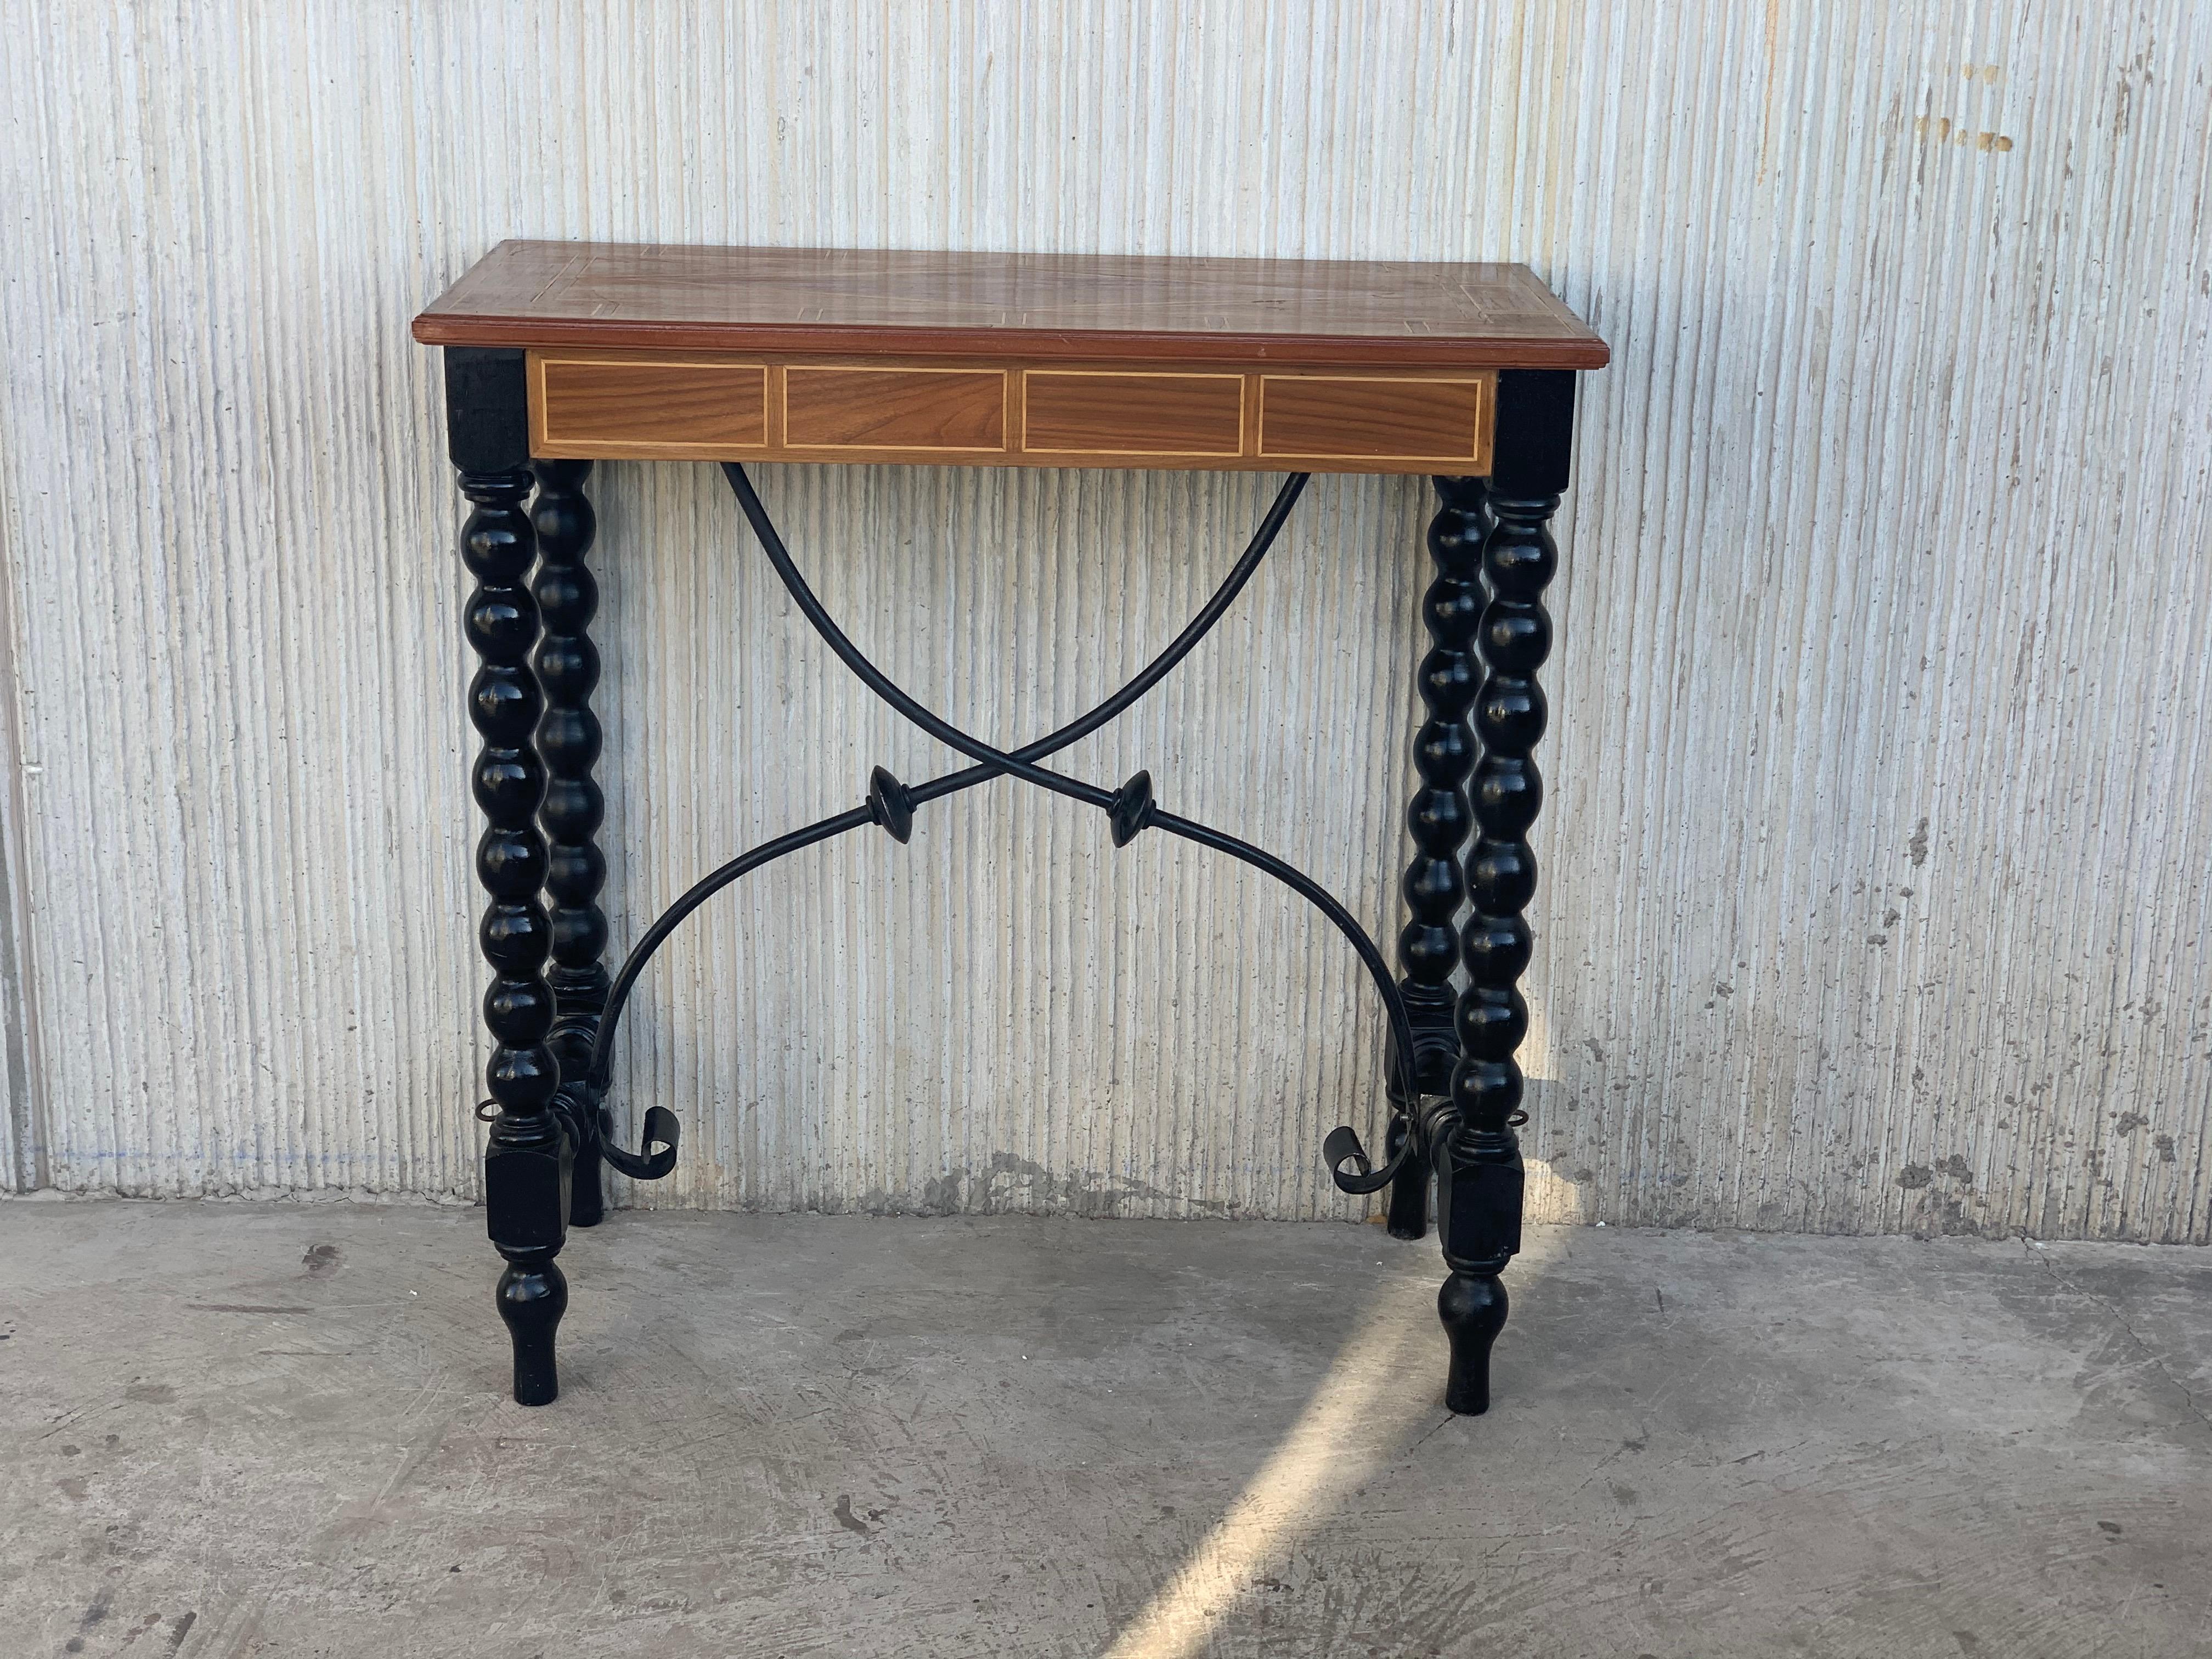 Baroque Spanish Console Table with Marquetry Top, Ebonized Legs & Iron Stretcher